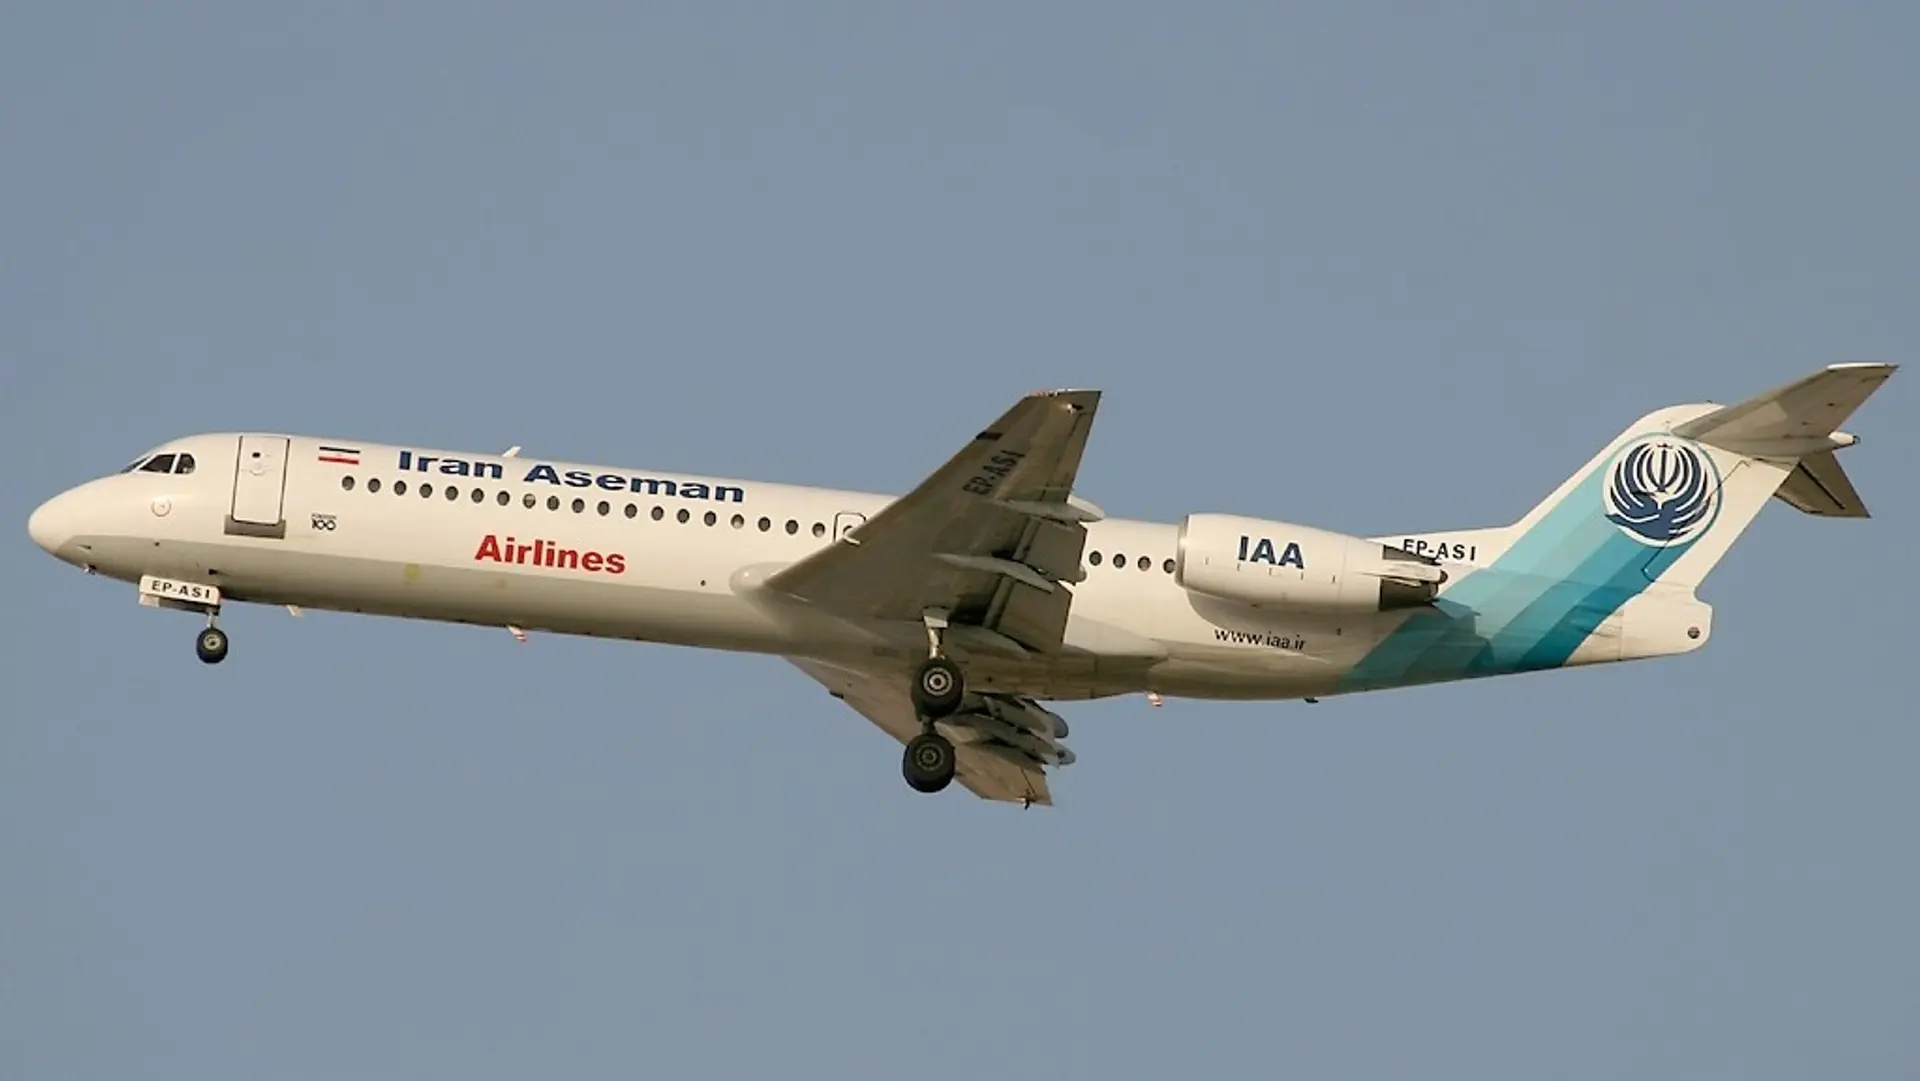 The Iran Aseman Airlines fokker 100 in the iar